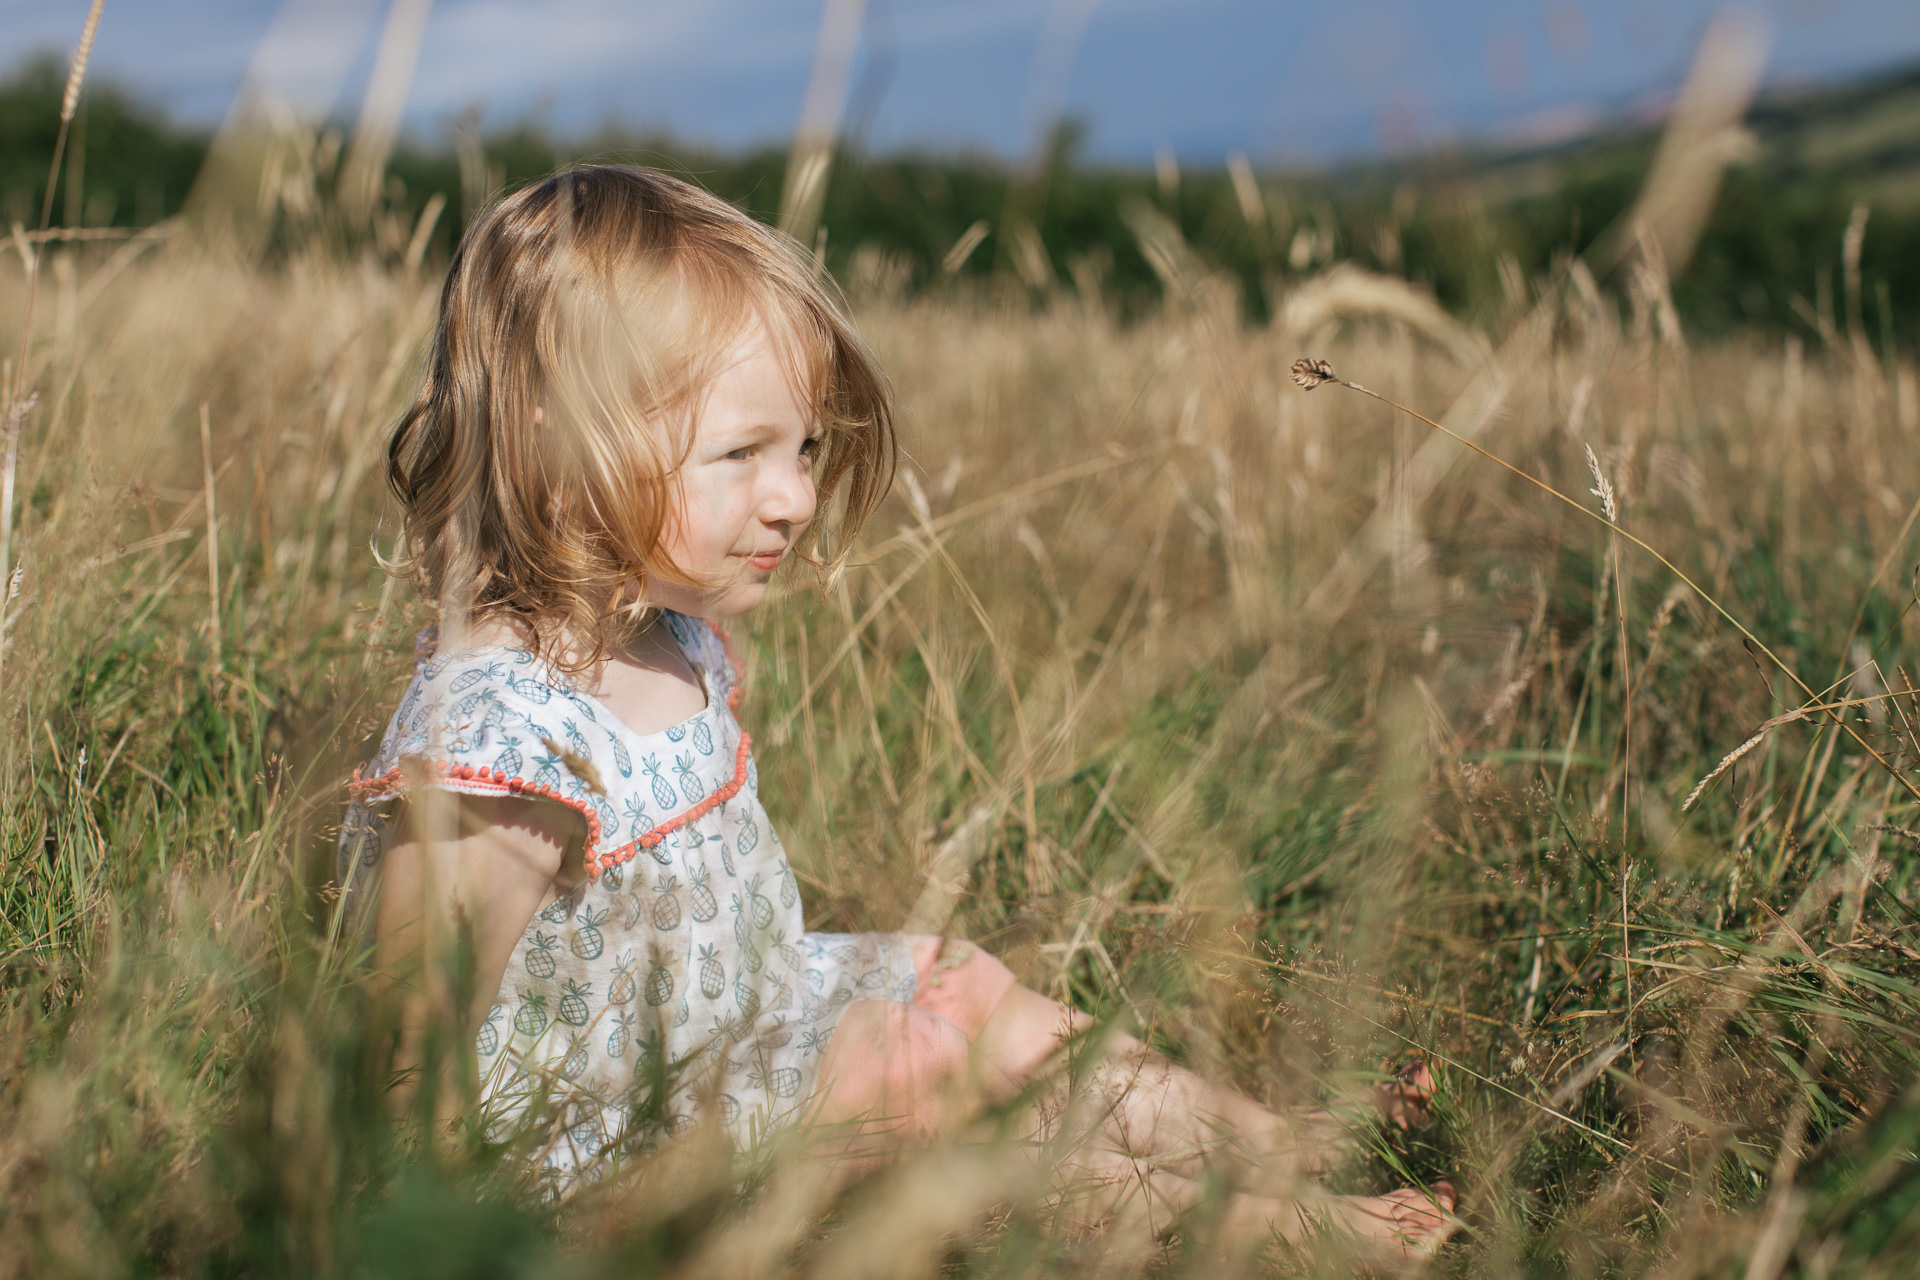 A small girl sitting in some long grass